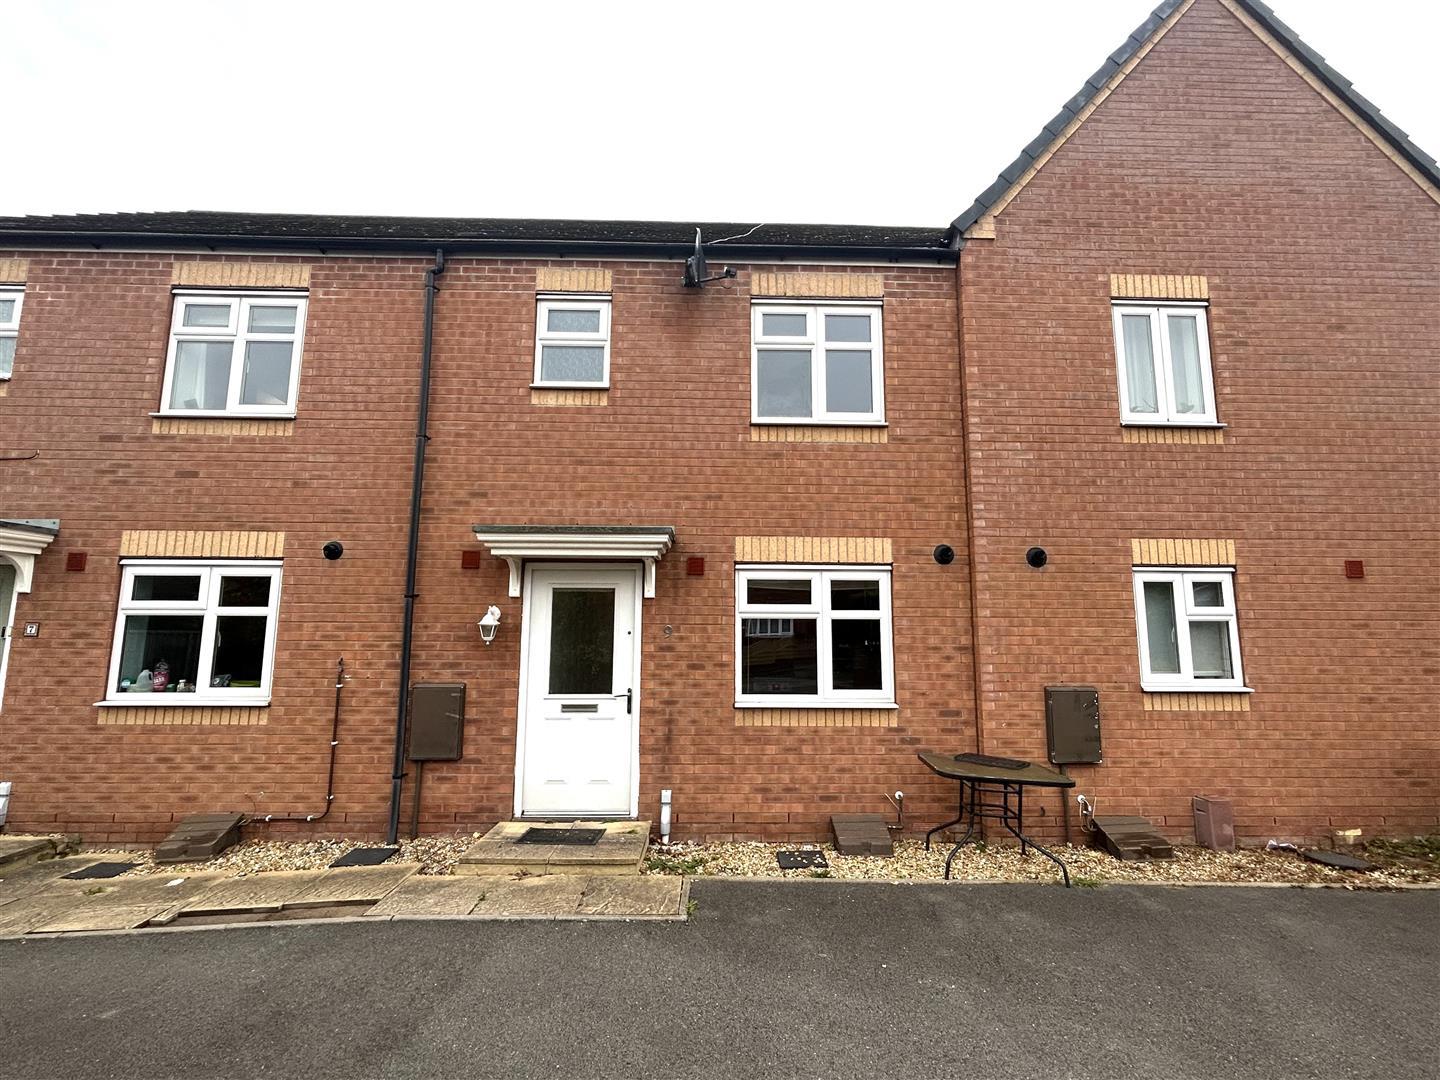 3 bed house for sale in Banners Lane, Halesowen  - Property Image 16